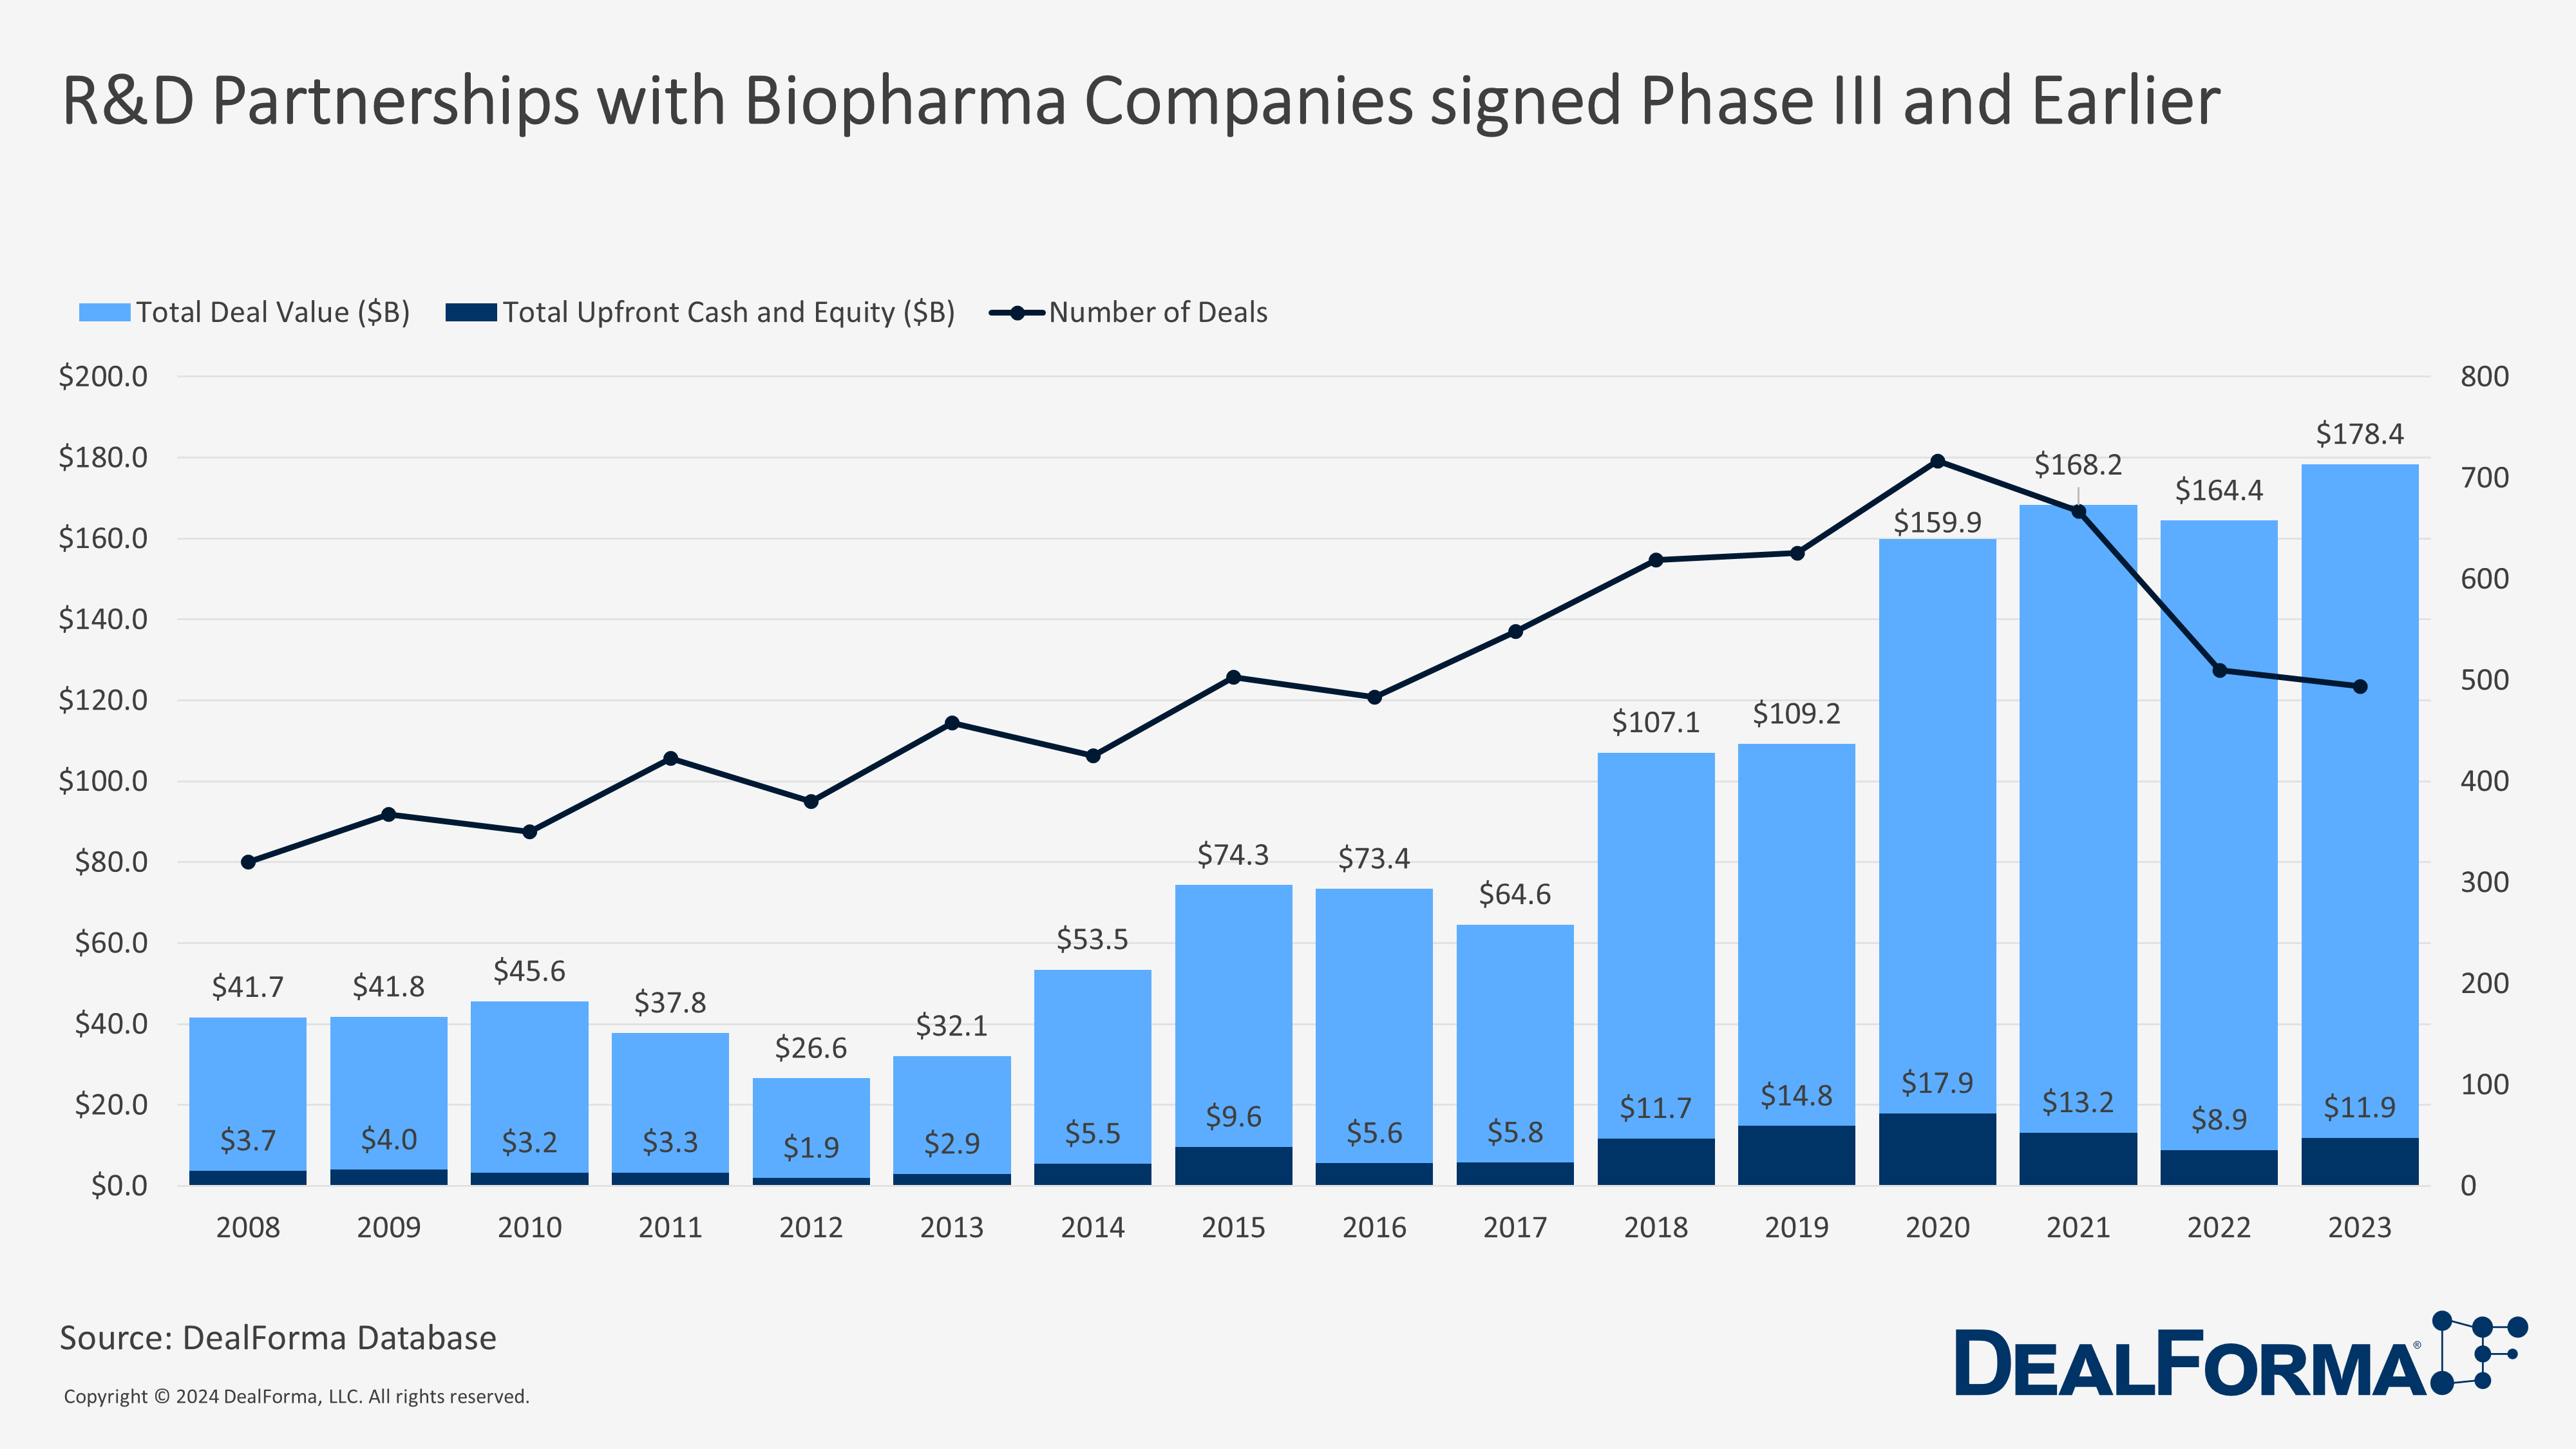 R&D Partnerships with Biopharma Companies signed Phase III and Earlier